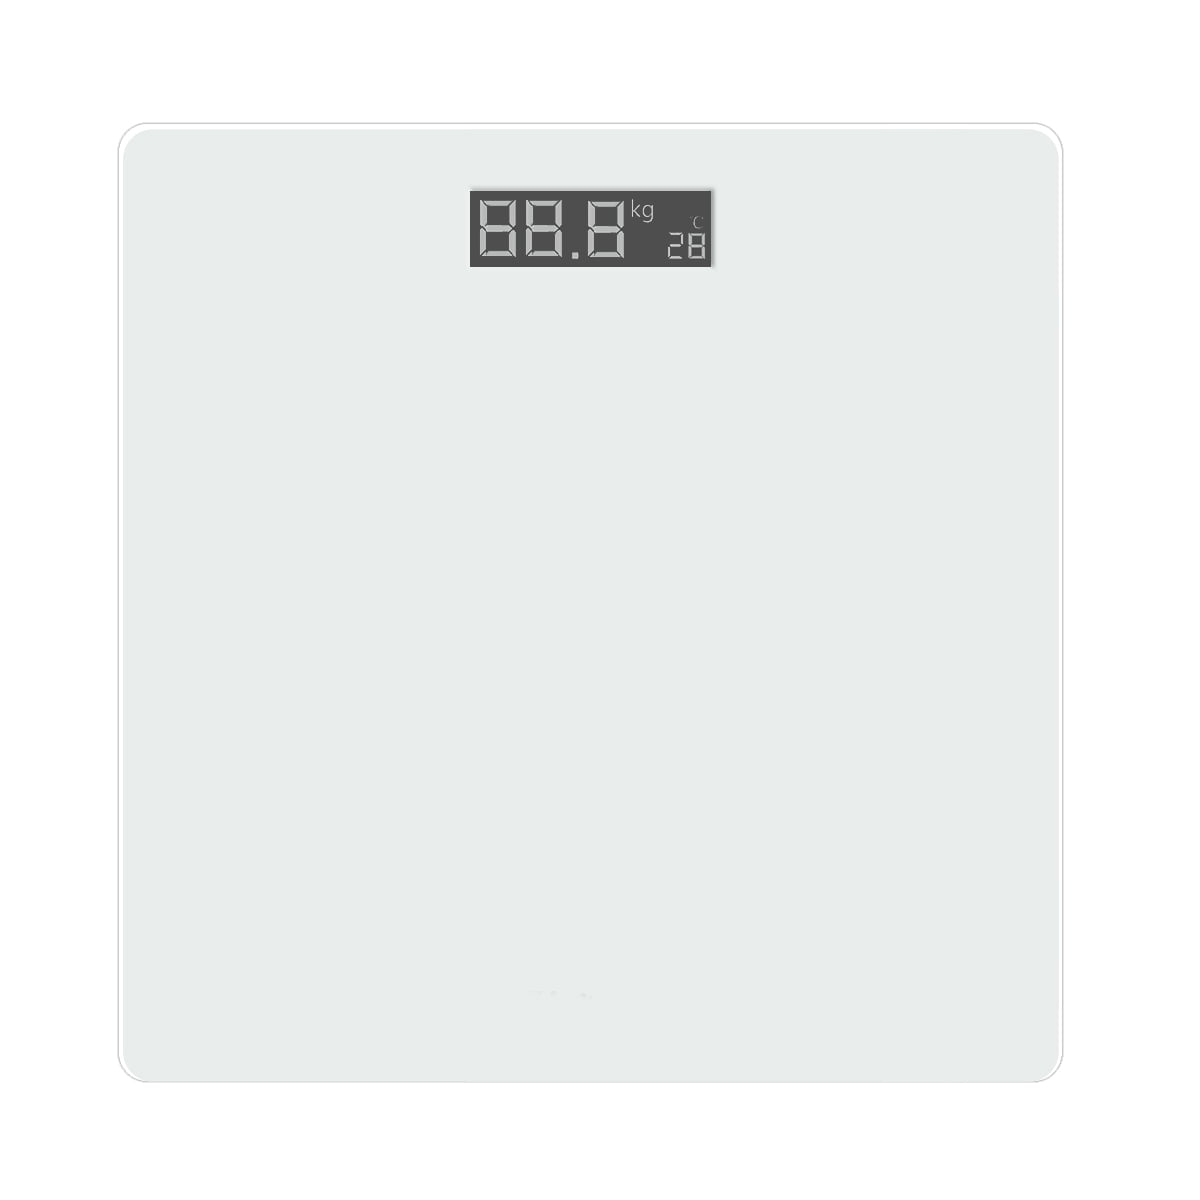 Max 400 lbs/180kg High Precision LIVIN Digital Body Weight Scale Rounded Corners Step-On & Auto-Off Batteries Included Tempered Glass Top Digital Bathroom Scale w/ Large LED Display